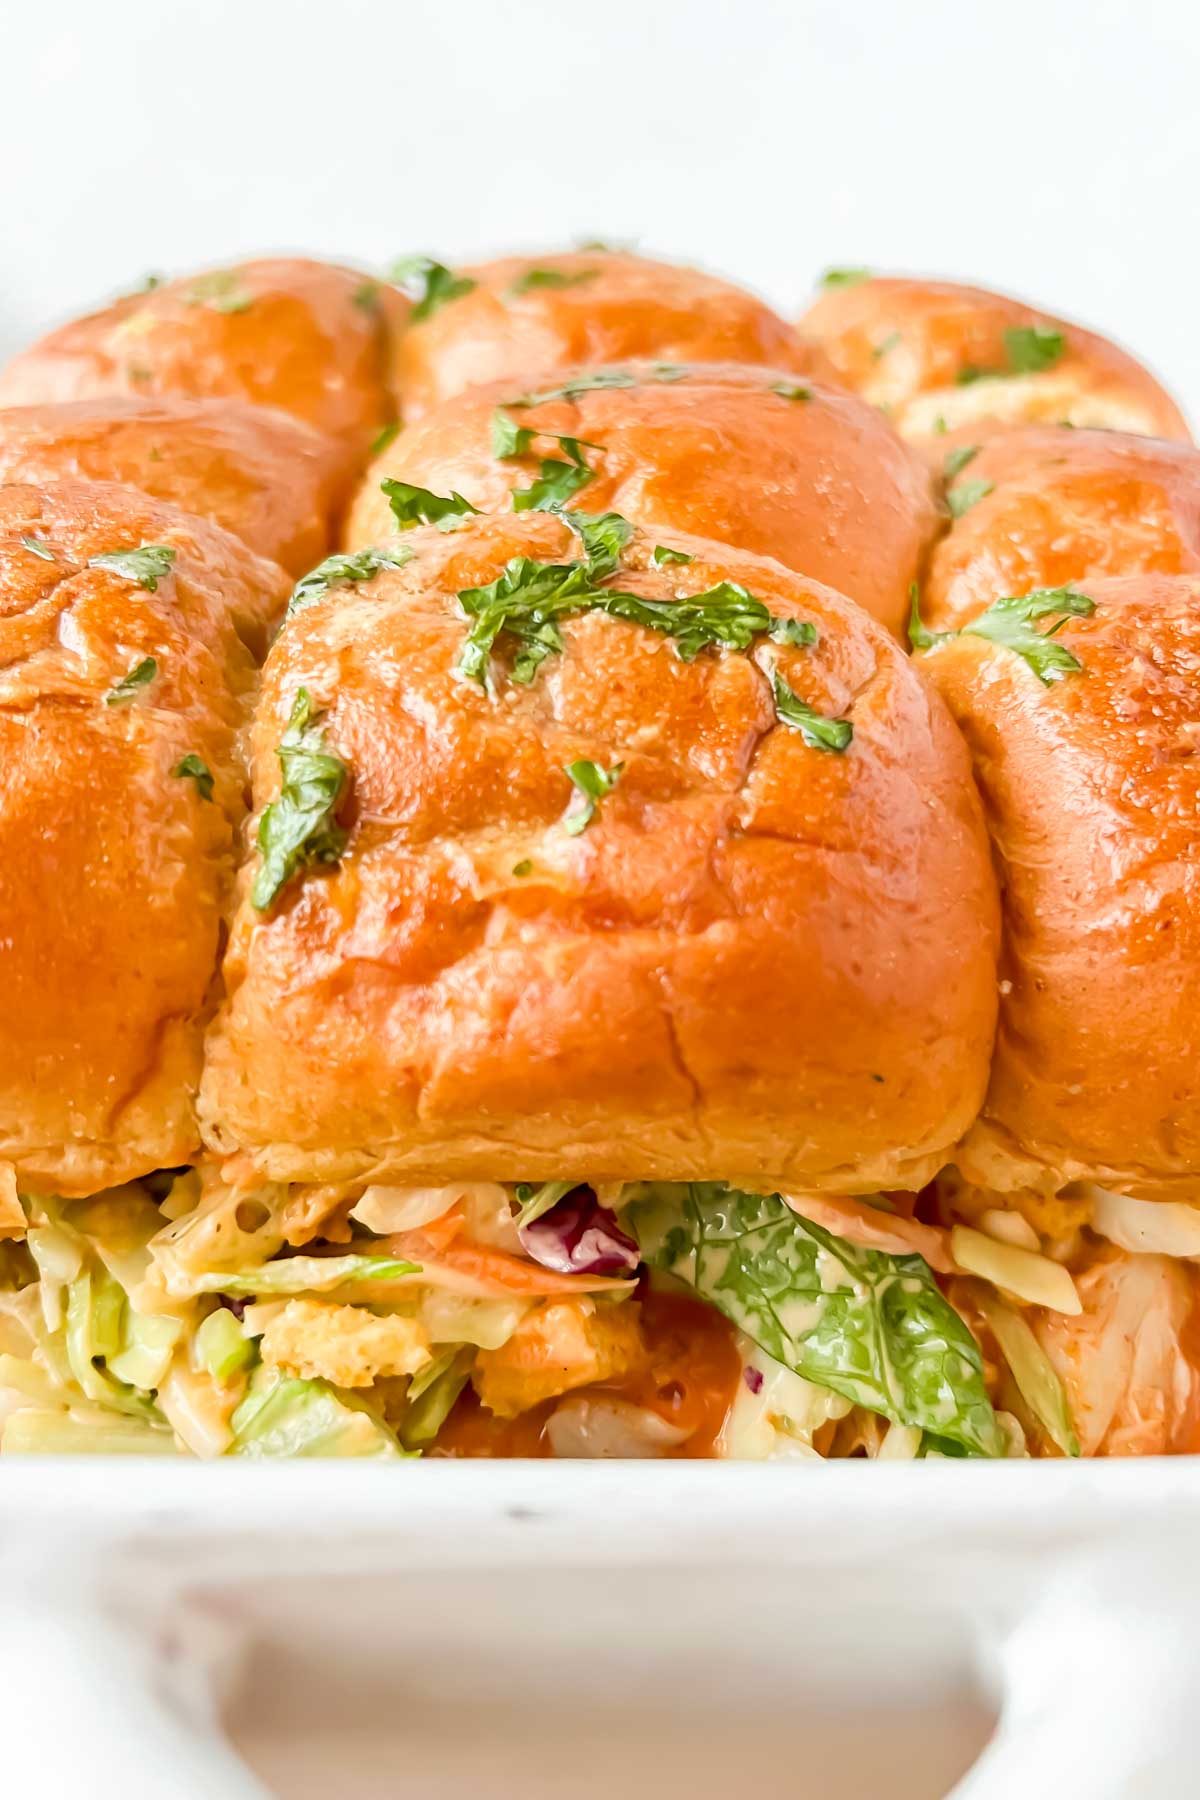 pan full of buffalo chicken sliders garnished with fresh herbs.